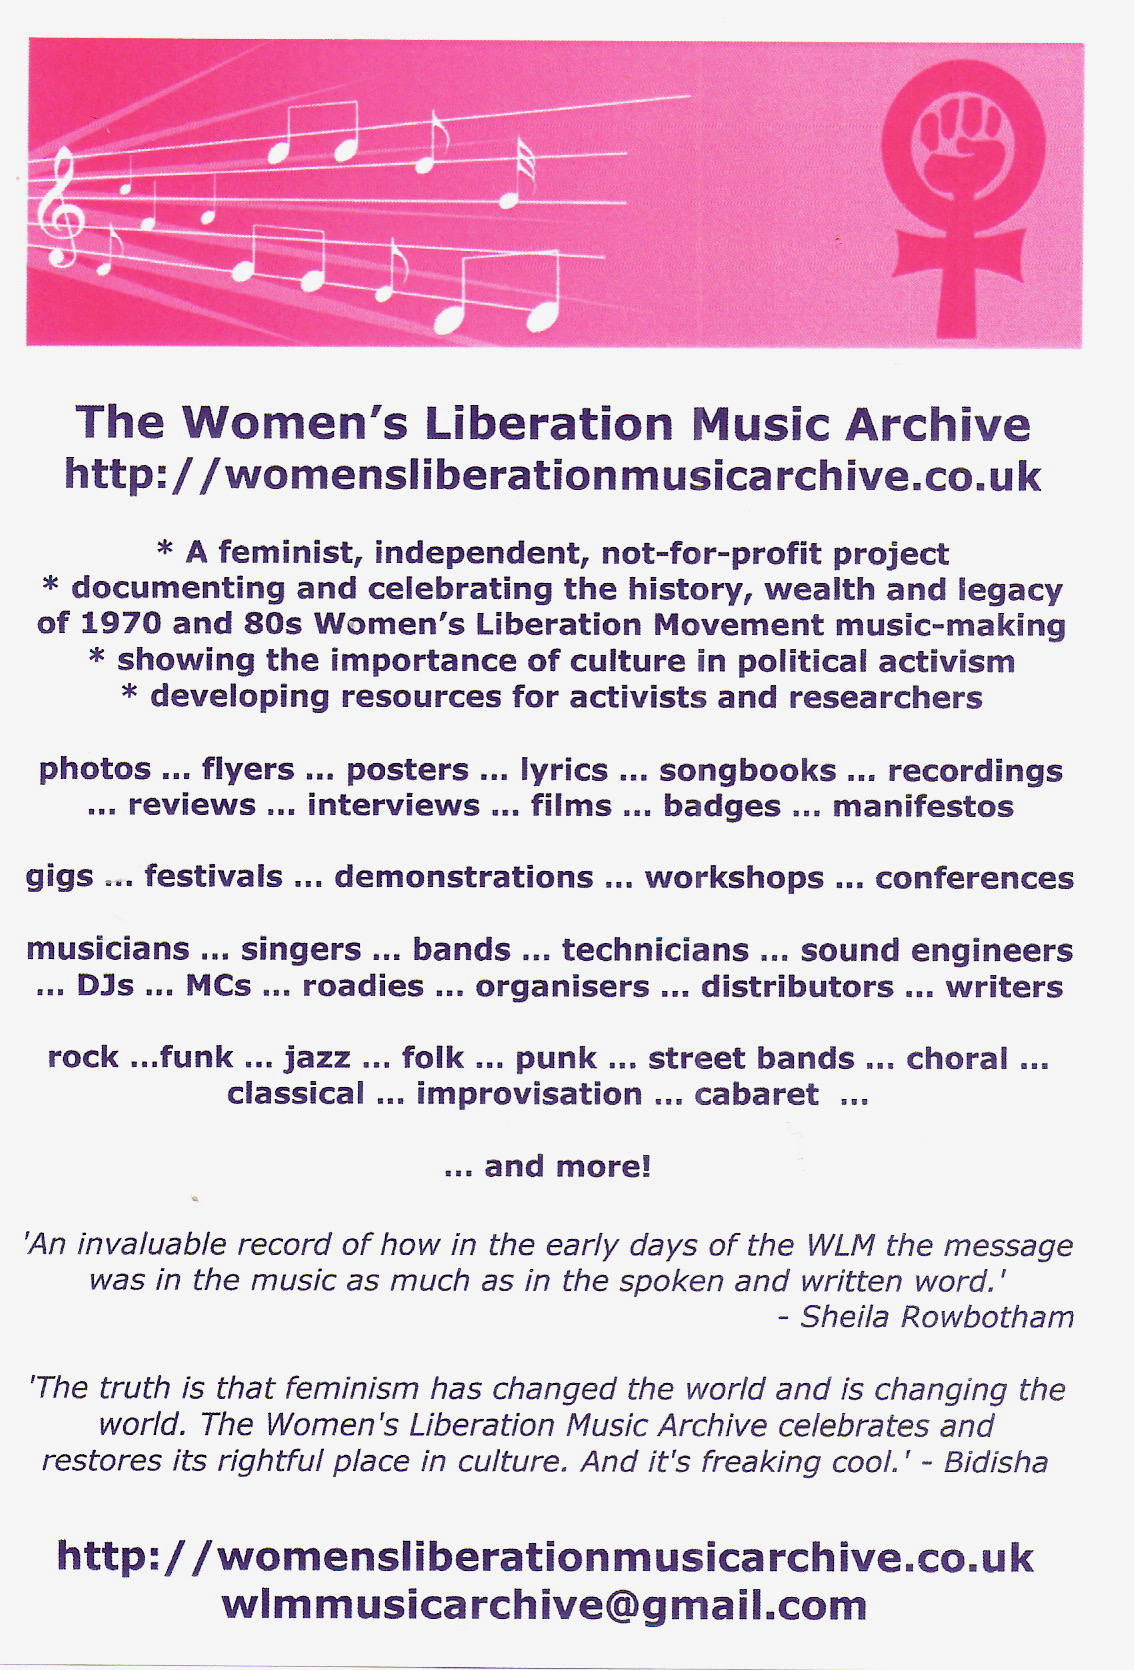 A flyer describes the archive, listing what it comprises: recordings, photos, ephemera. A WLM symbol is juxtaposed with musical notes.